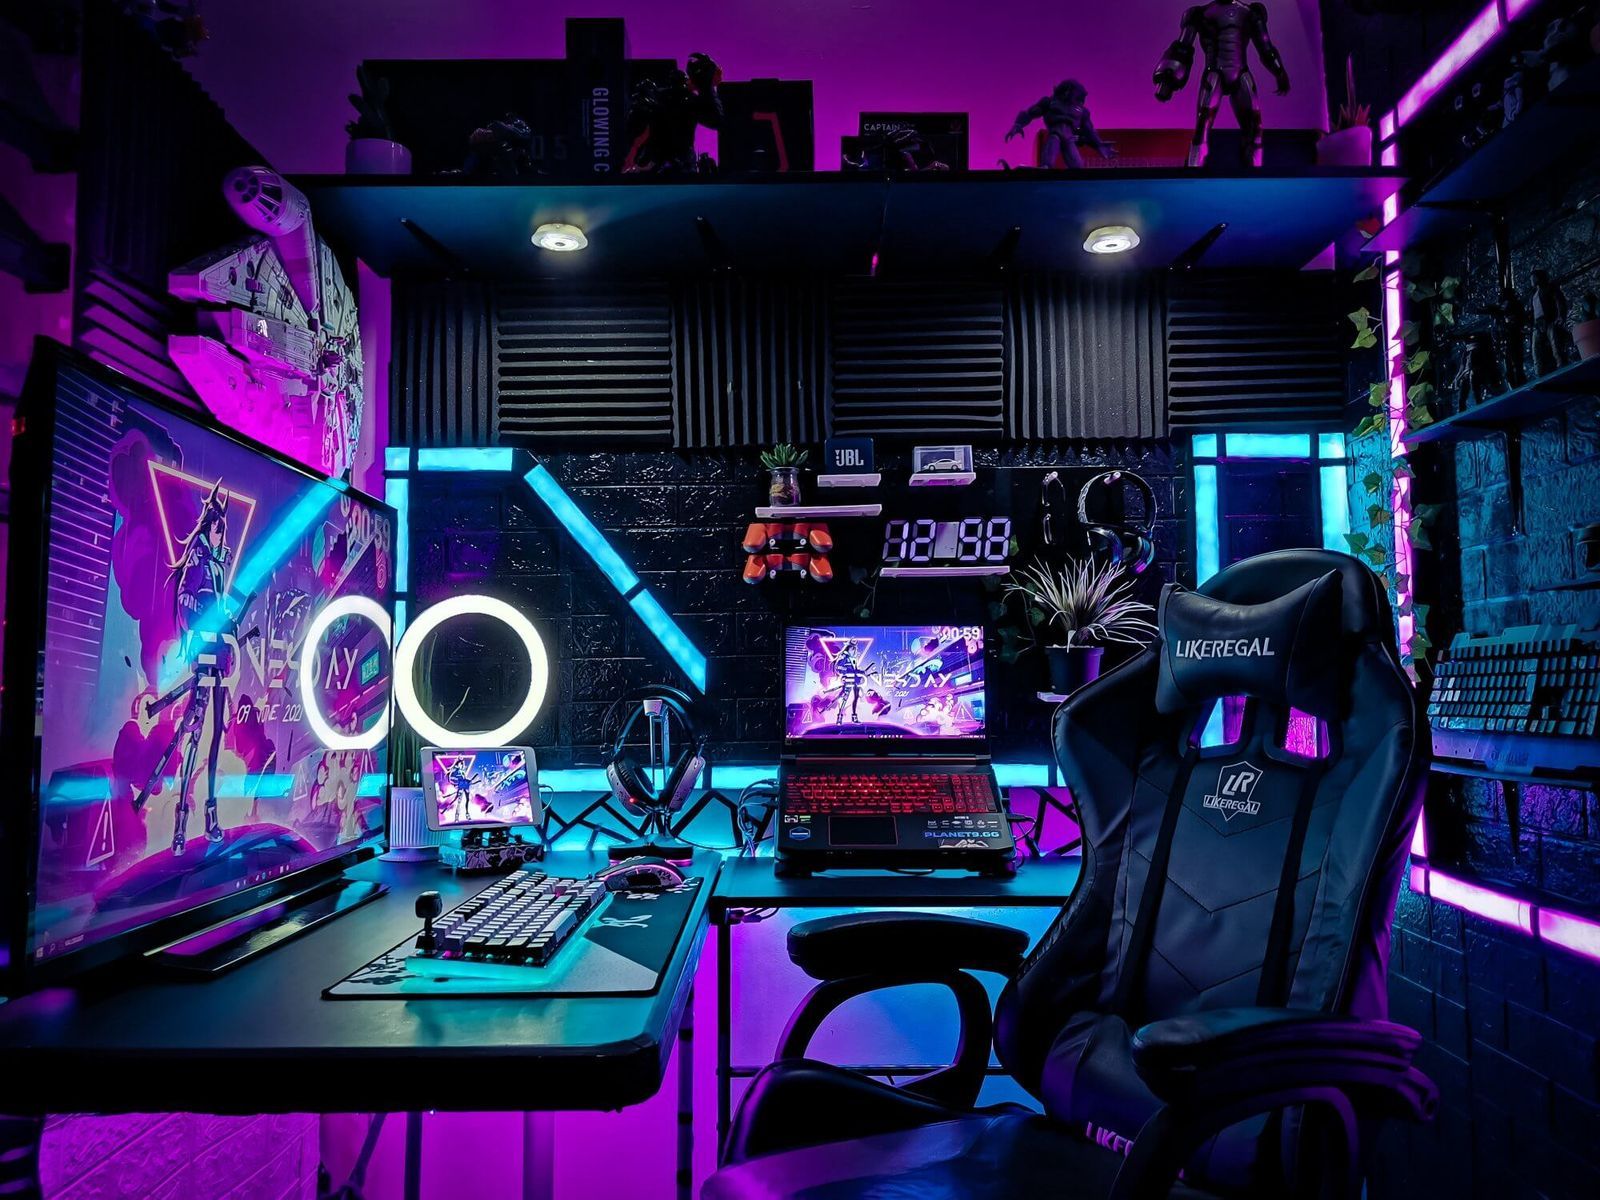 A vibrant gaming setup with neon lights, featuring multiple monitors, a gaming chair, and decorative figures. The room is bathed in purple and blue light, creating a dynamic atmosphere